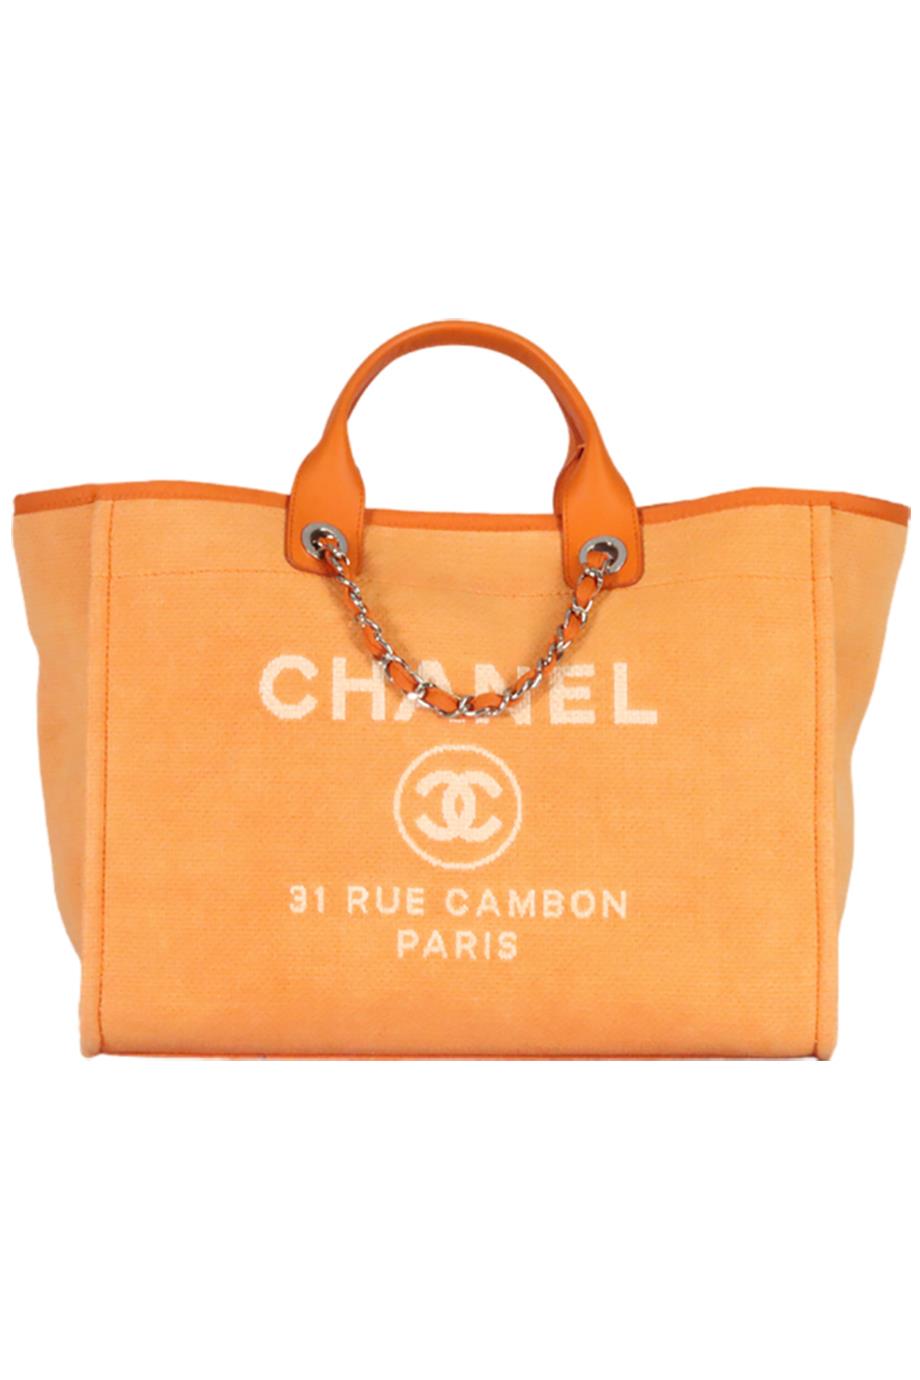 CHANEL 2015 DEAUVILLE MEDIUM CANVAS AND LEATHER TOTE BAG